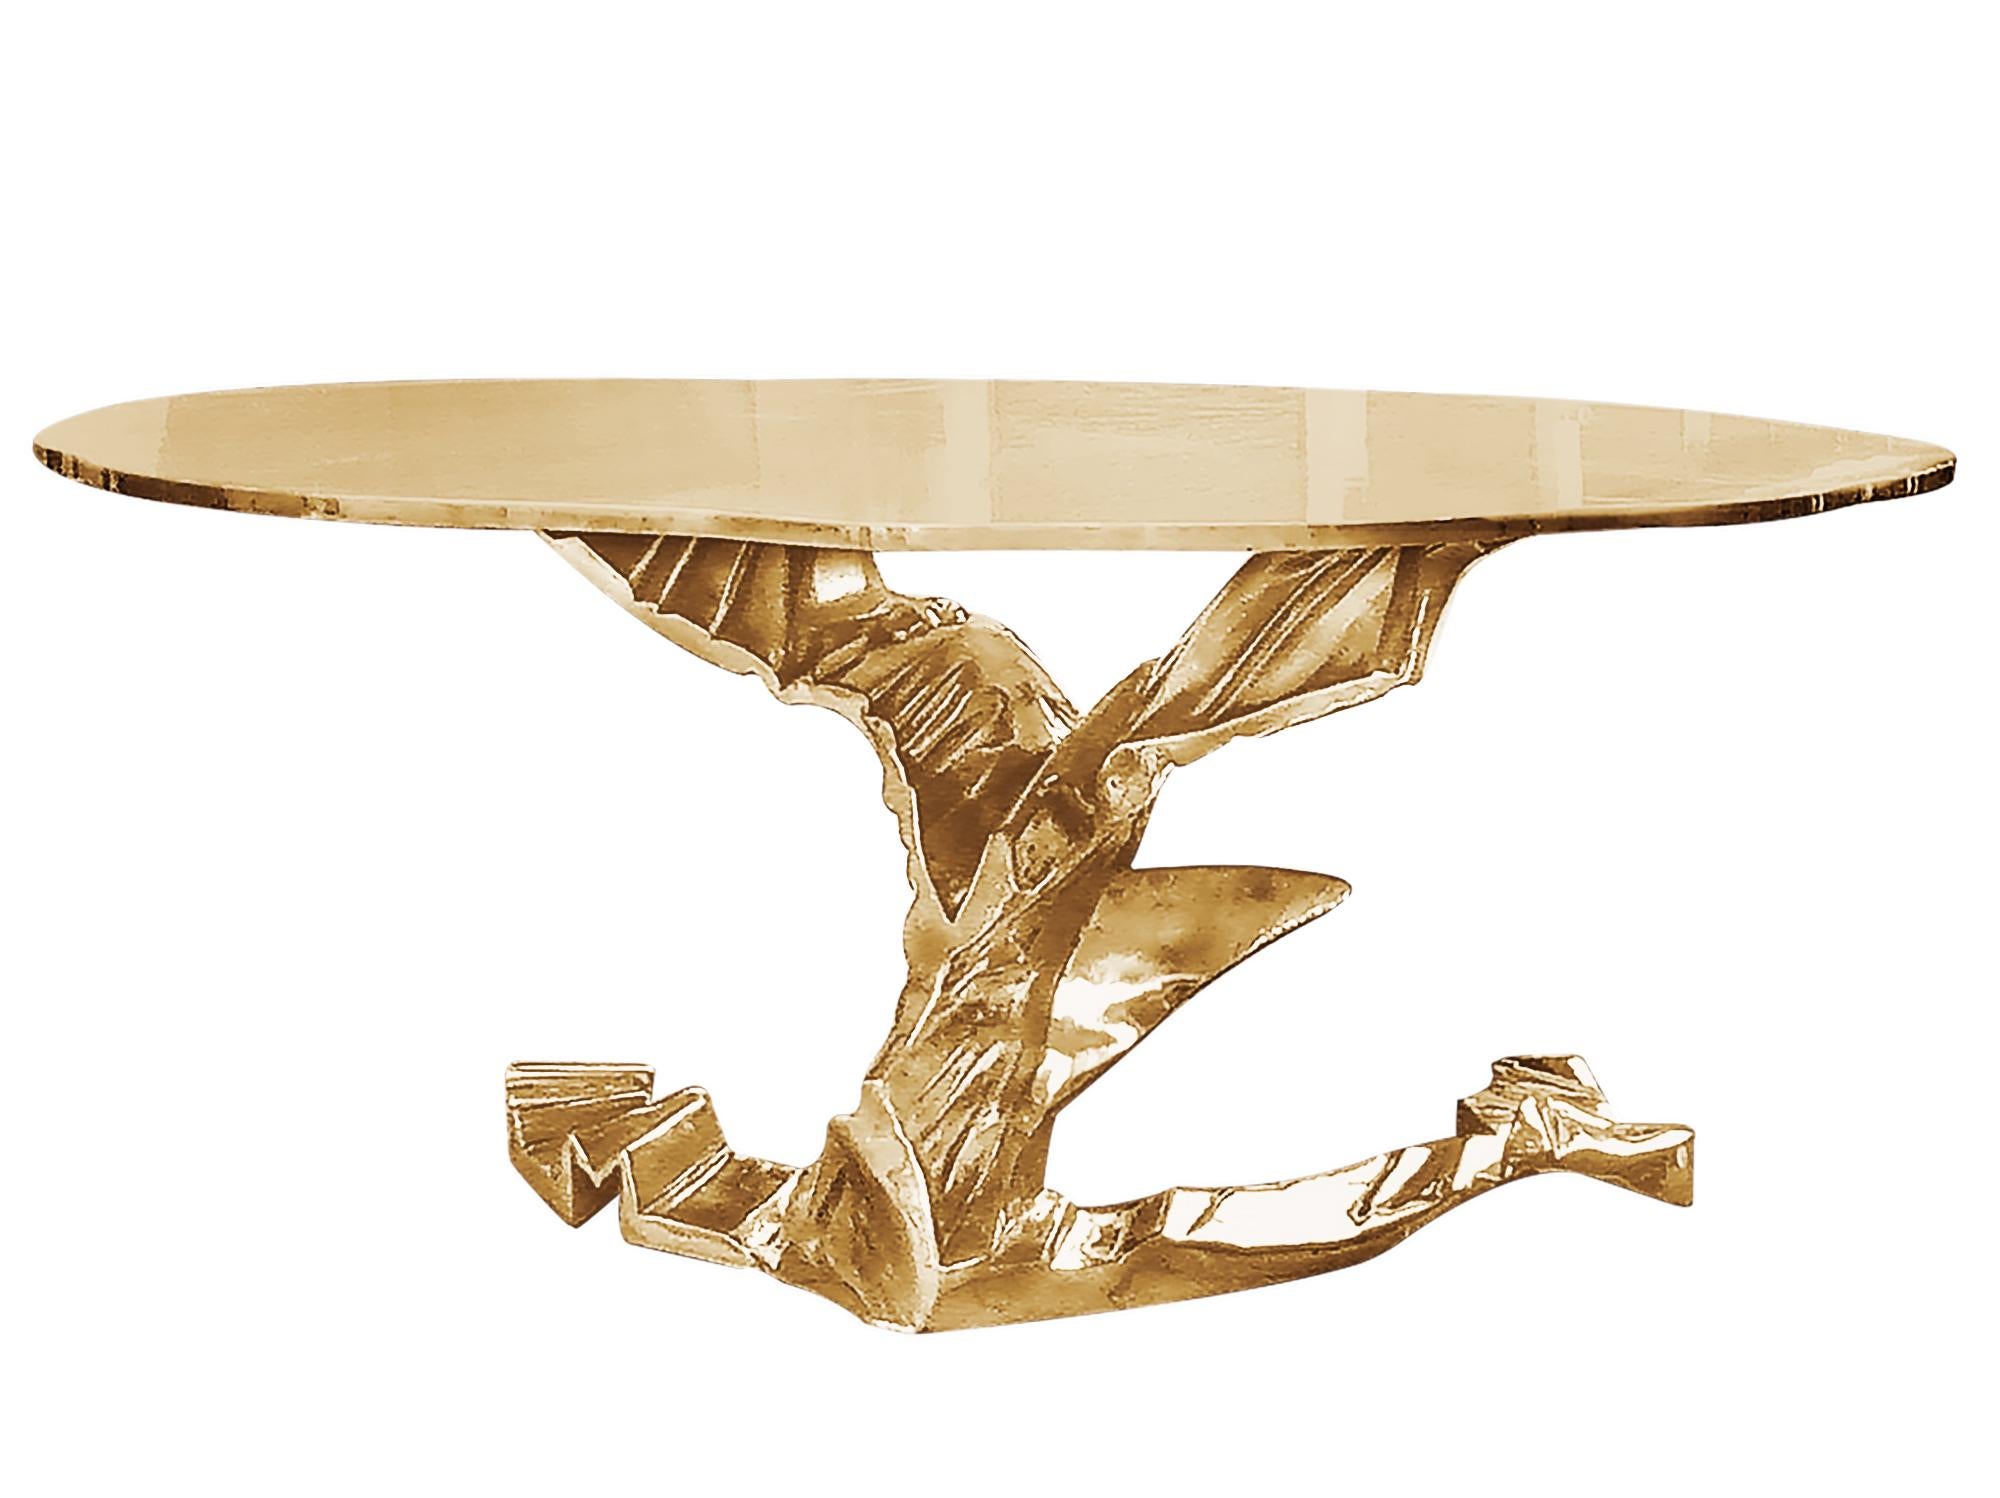 Hand sculpted in a Brutalist style, this organic table holds a 60